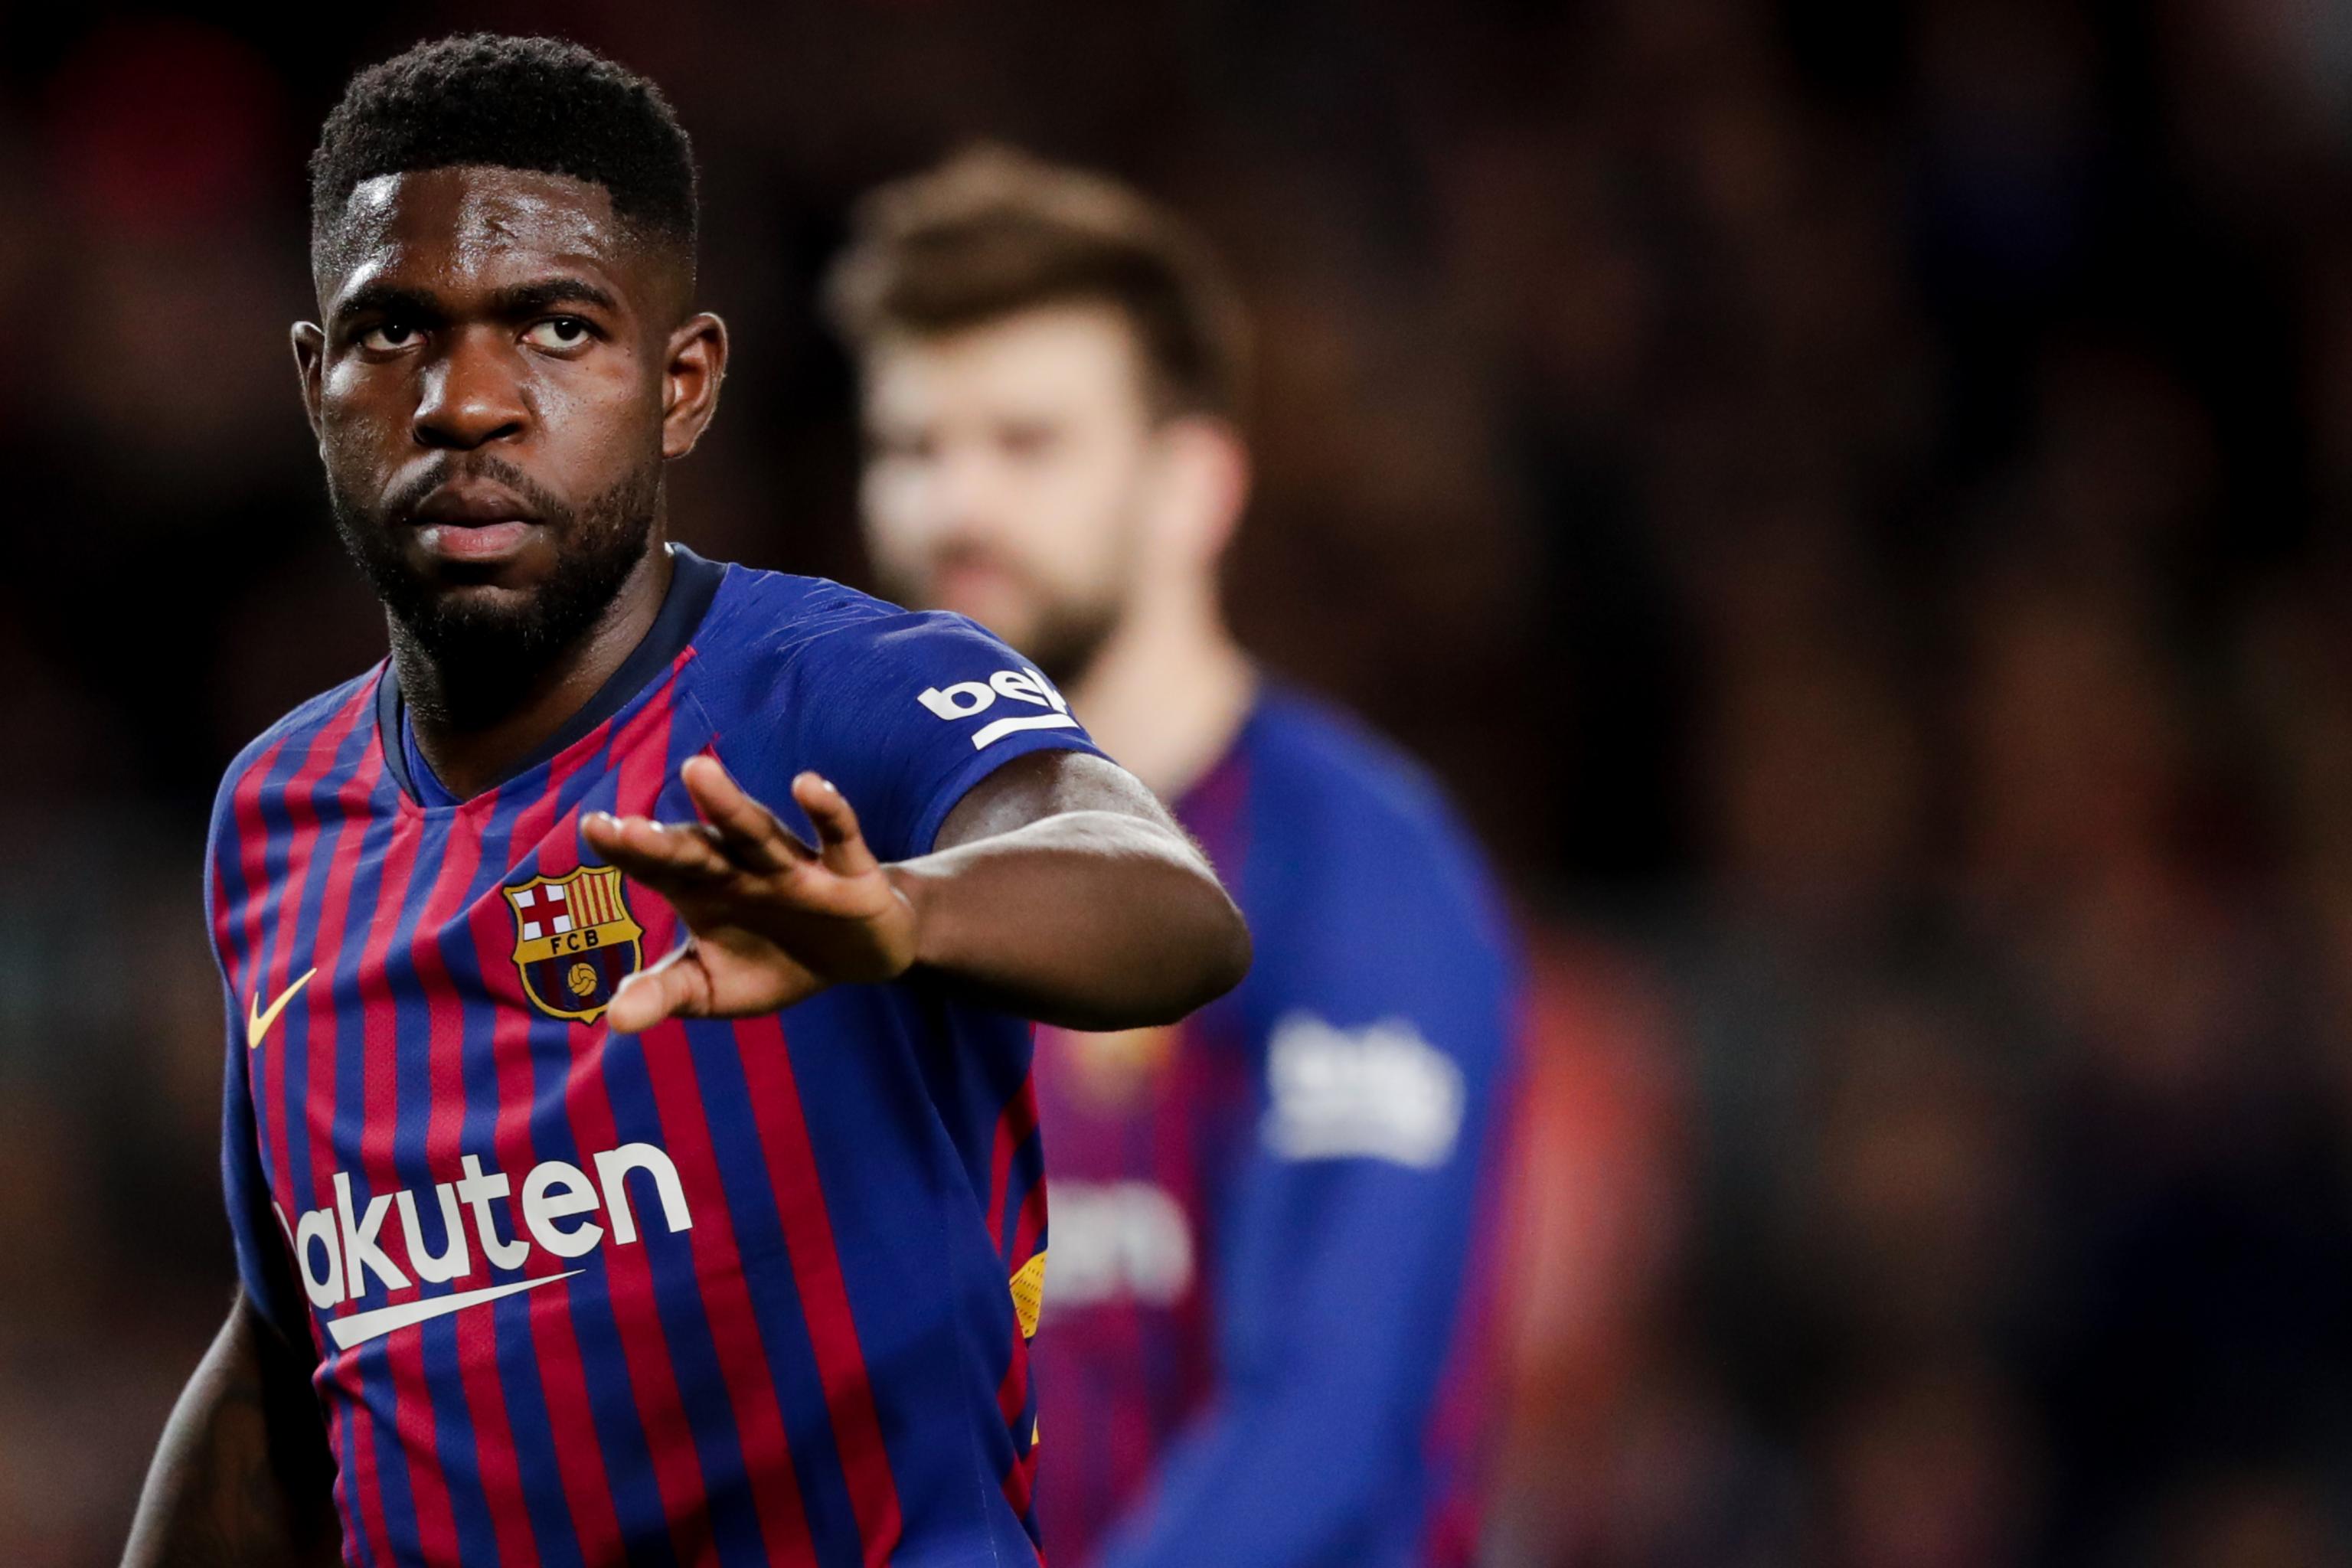 Samuel Umtiti Says He Will Stay at Barcelona Amid Rumours | Bleacher Report | Latest News, Videos and Highlights